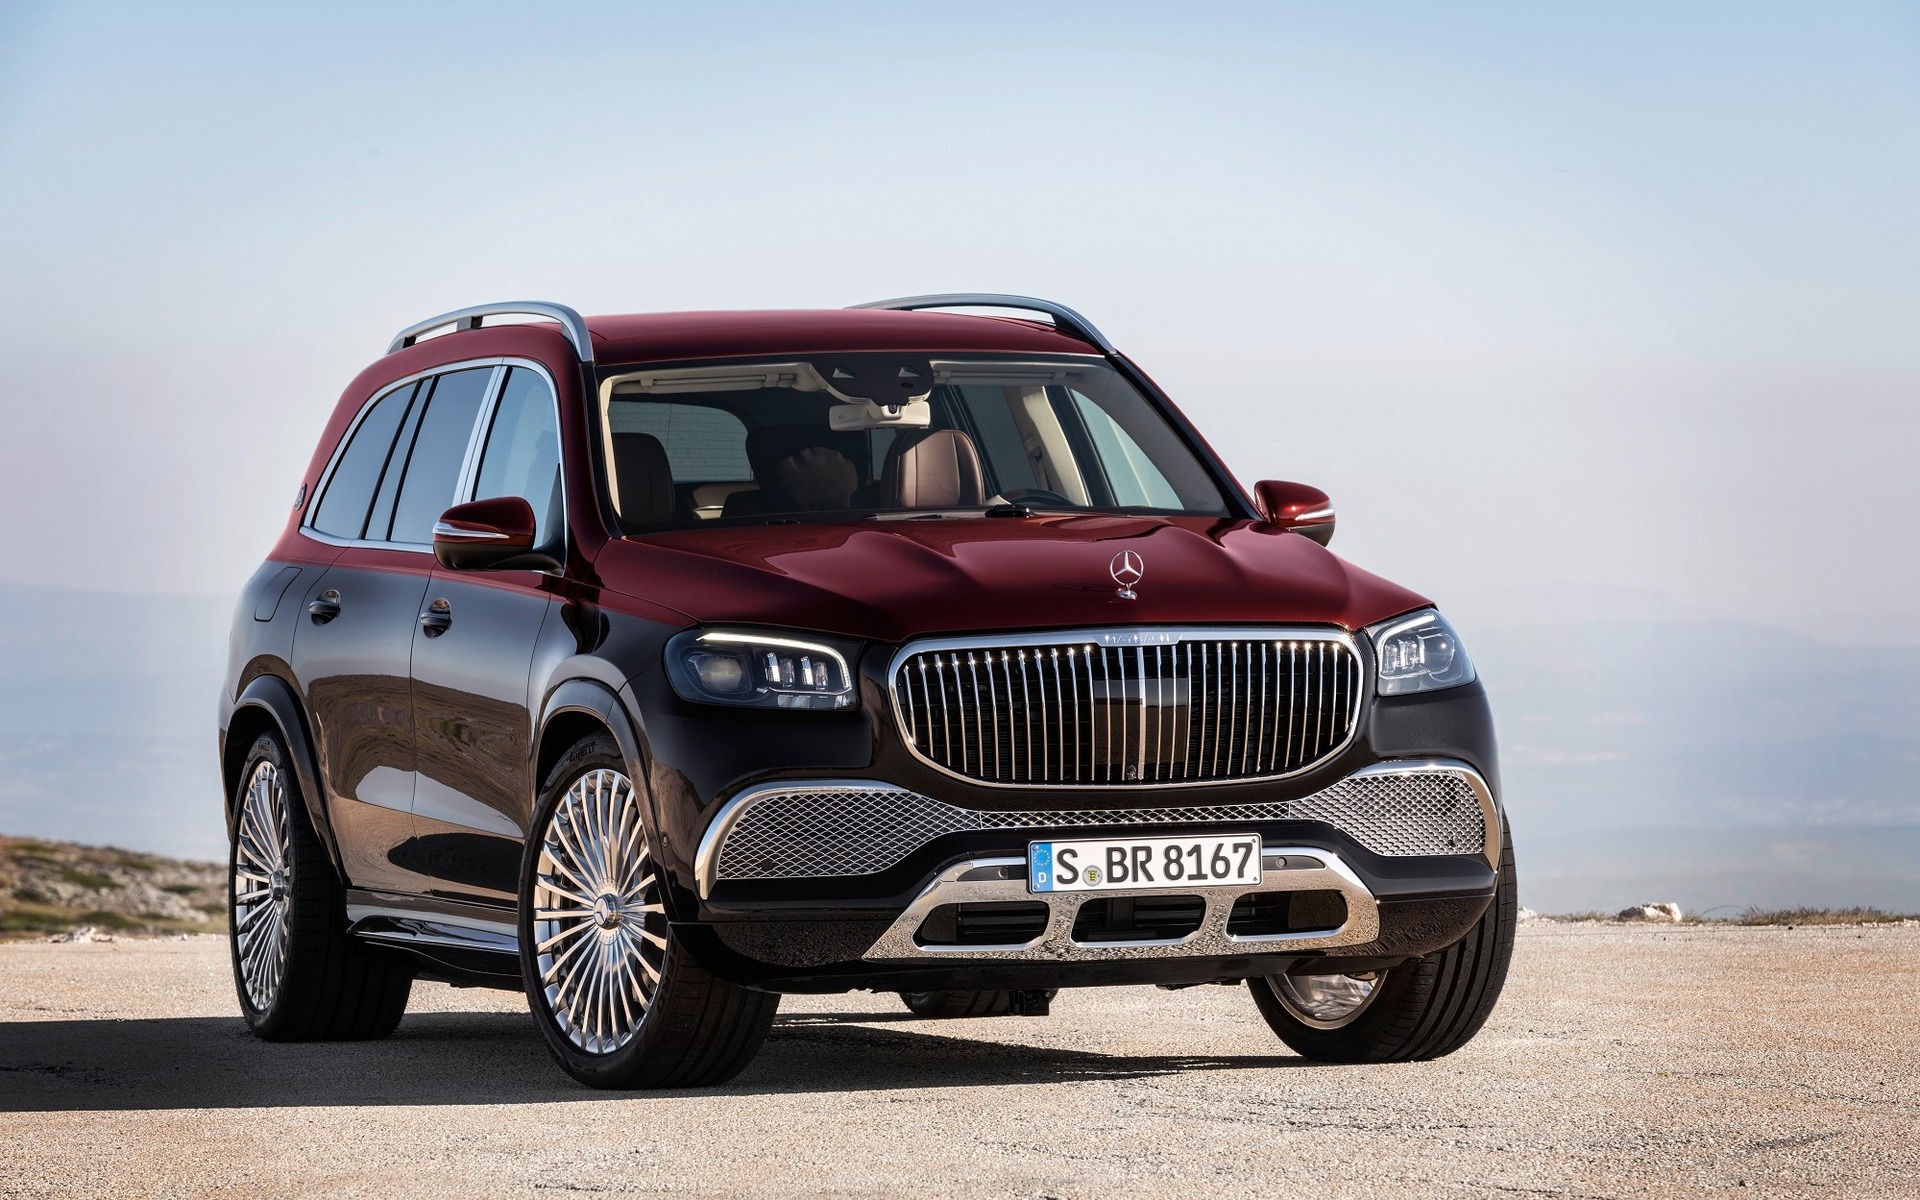 Mercedes-Maybach GLS 600: We All Want to Sit in the Rear - The Car Guide